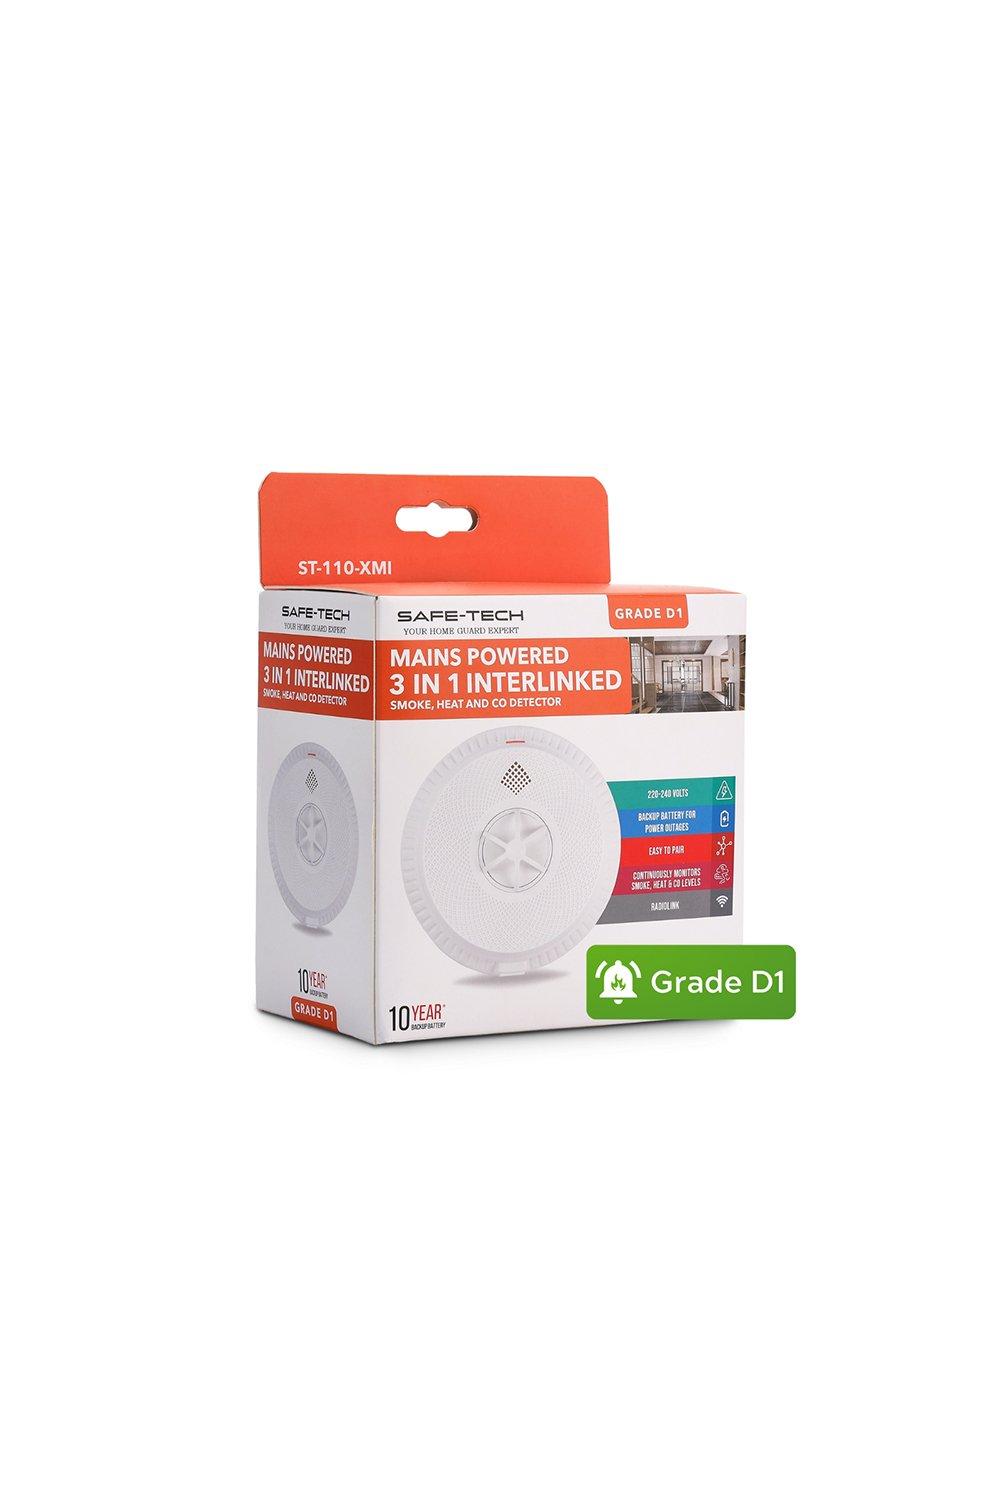 Main-Powered 3 in 1 Multi Sensor Interlinked Fire Alarm, Smoke, Heat and Carbon Monoxide, with 10 ye